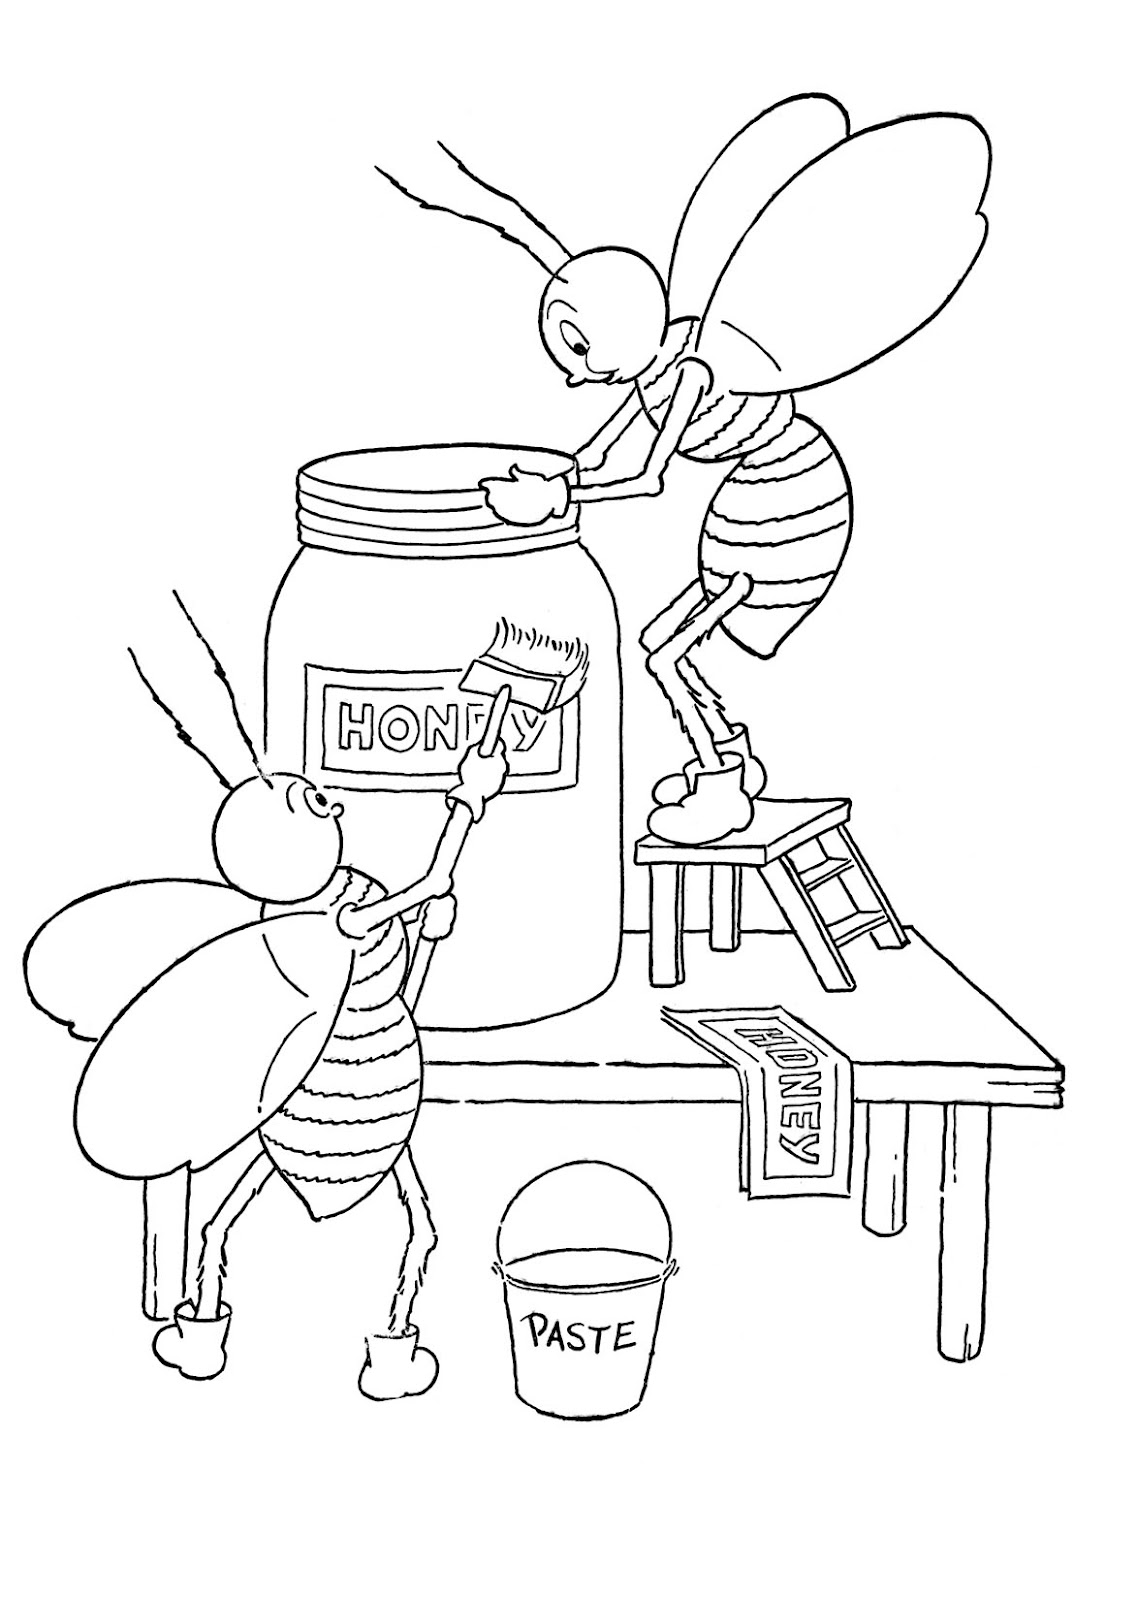 kids-printable-honey-bees-coloring-page-the-graphics-fairy